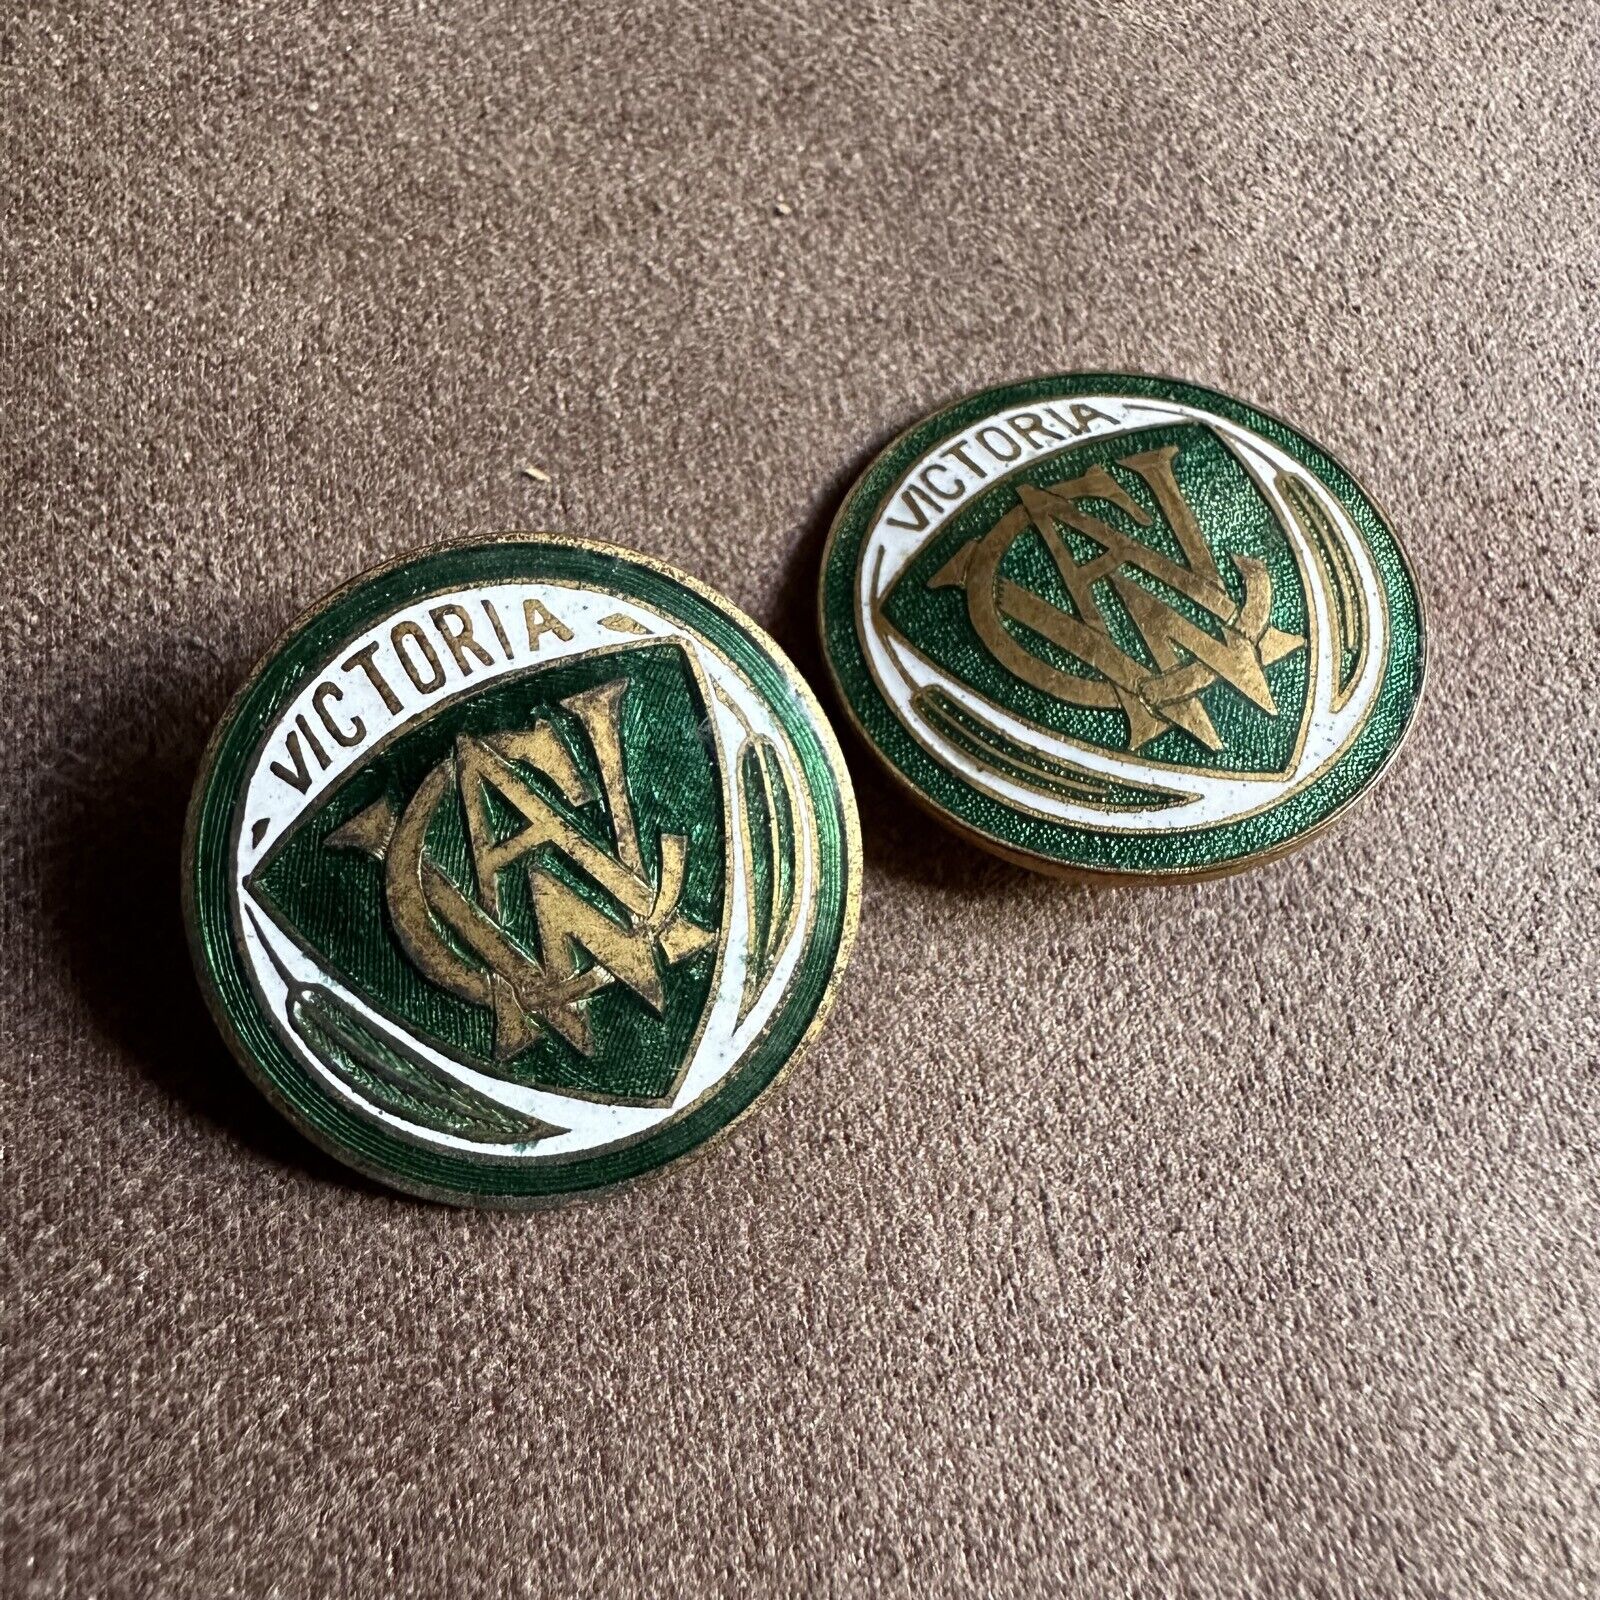 2x VINTAGE COUNTRY WOMANS ASSOCIATION VICTORIA GREEN ENAMEL PIN BADGES STOKES 